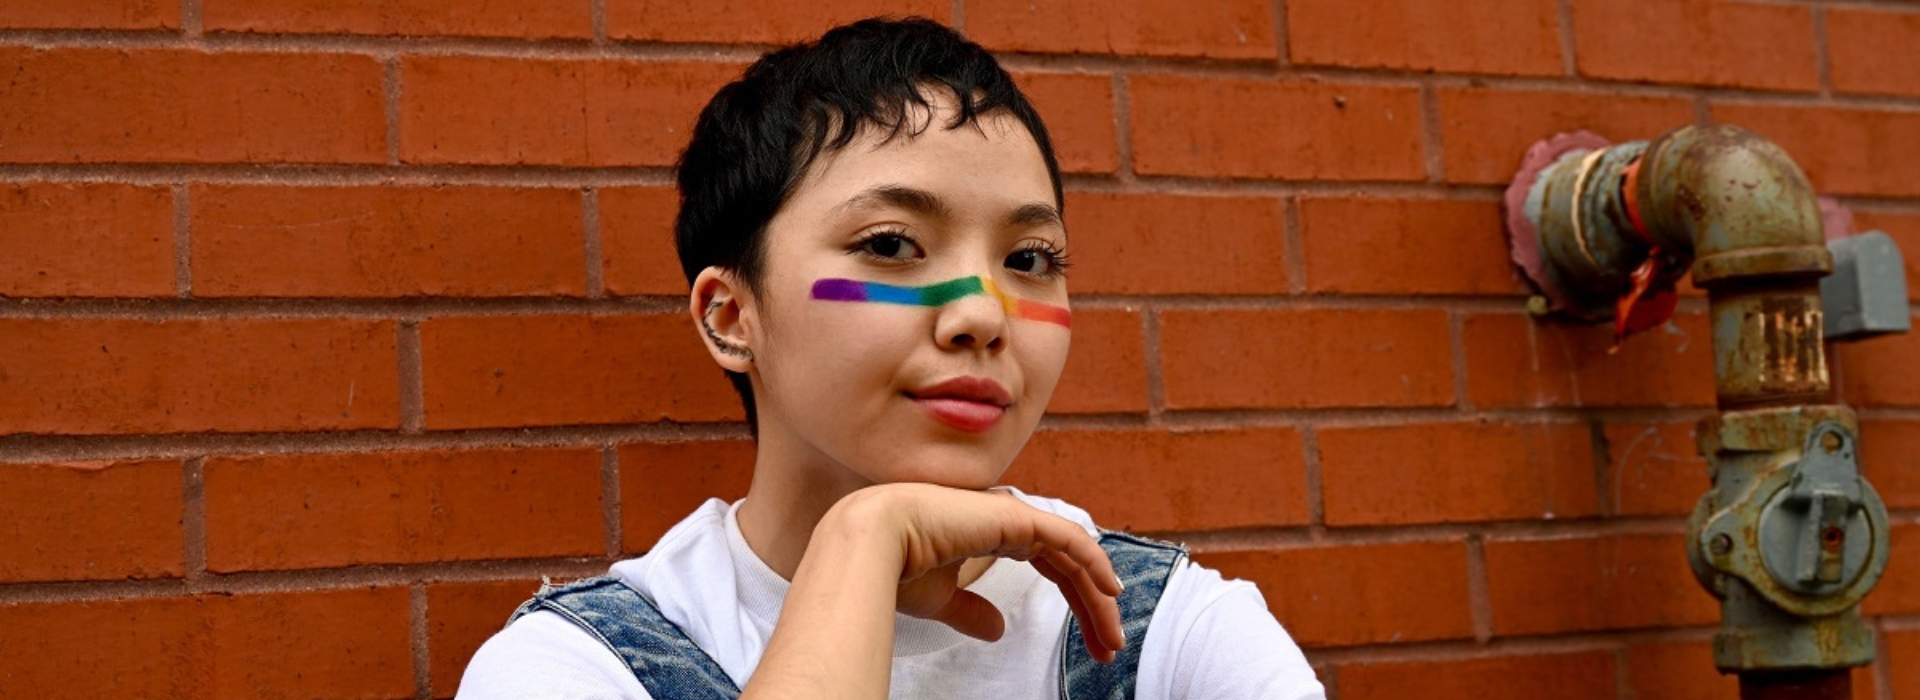 Young person with rainbow colours painted across their nose and cheeks